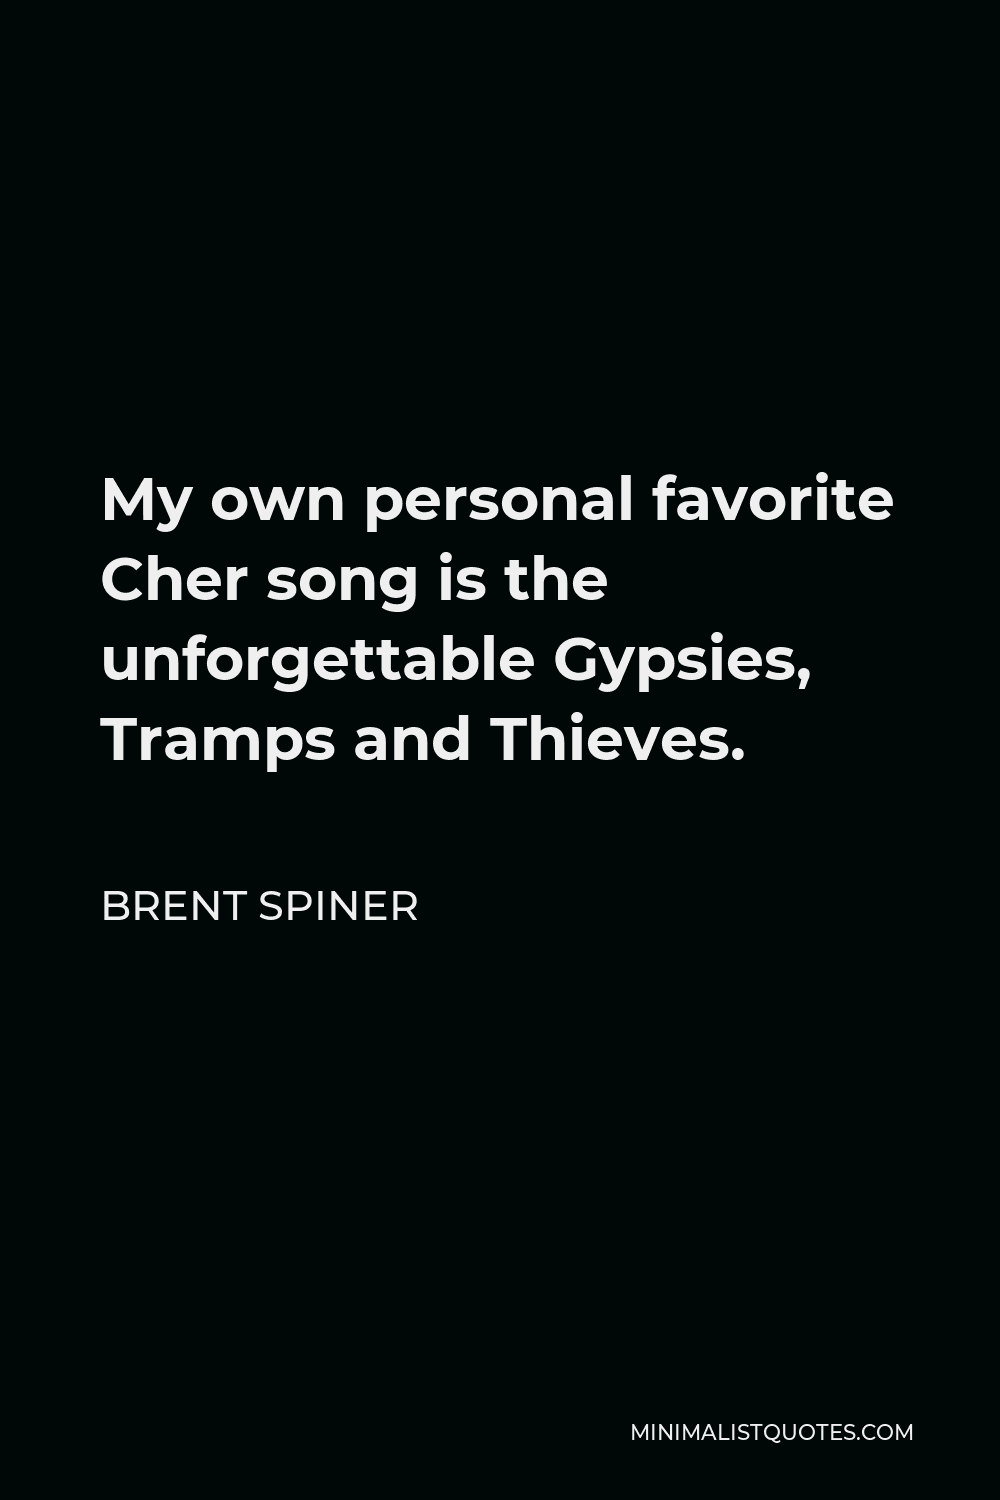 Brent Spiner Quote - My own personal favorite Cher song is the unforgettable Gypsies, Tramps and Thieves.